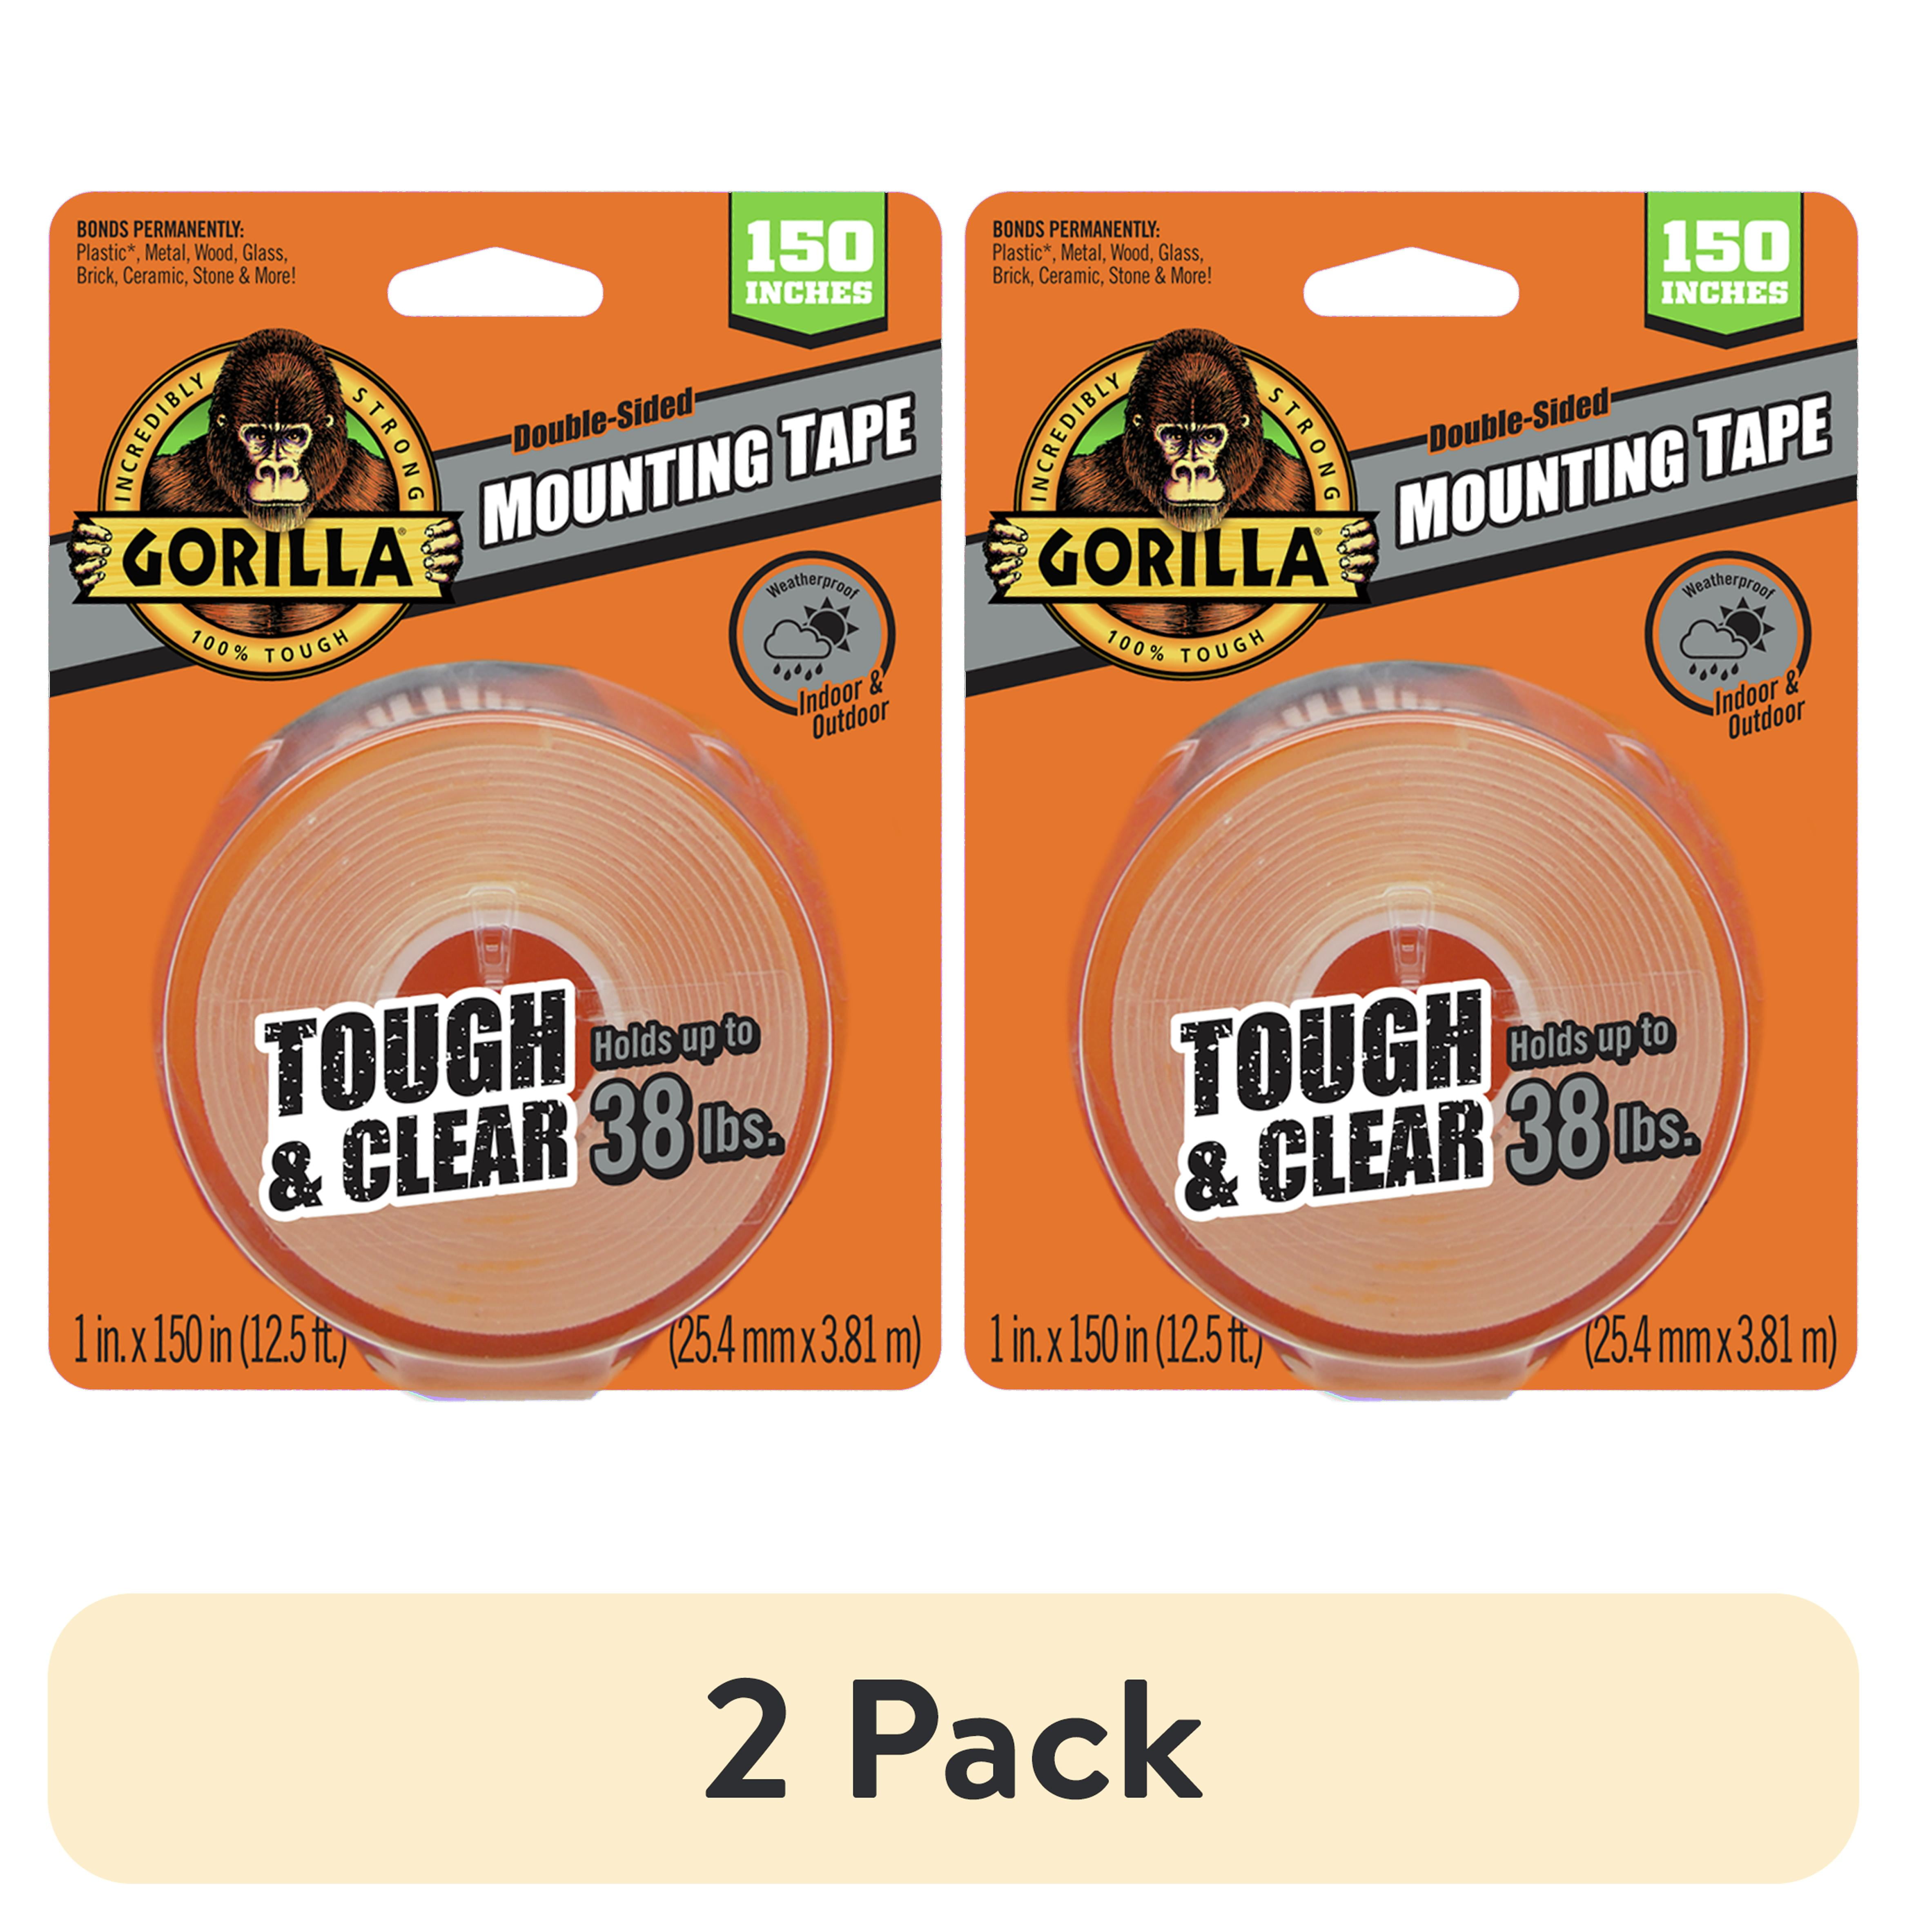 2 pack) Gorilla Tough & Clear Double-Sided Mounting Tape1 x 150